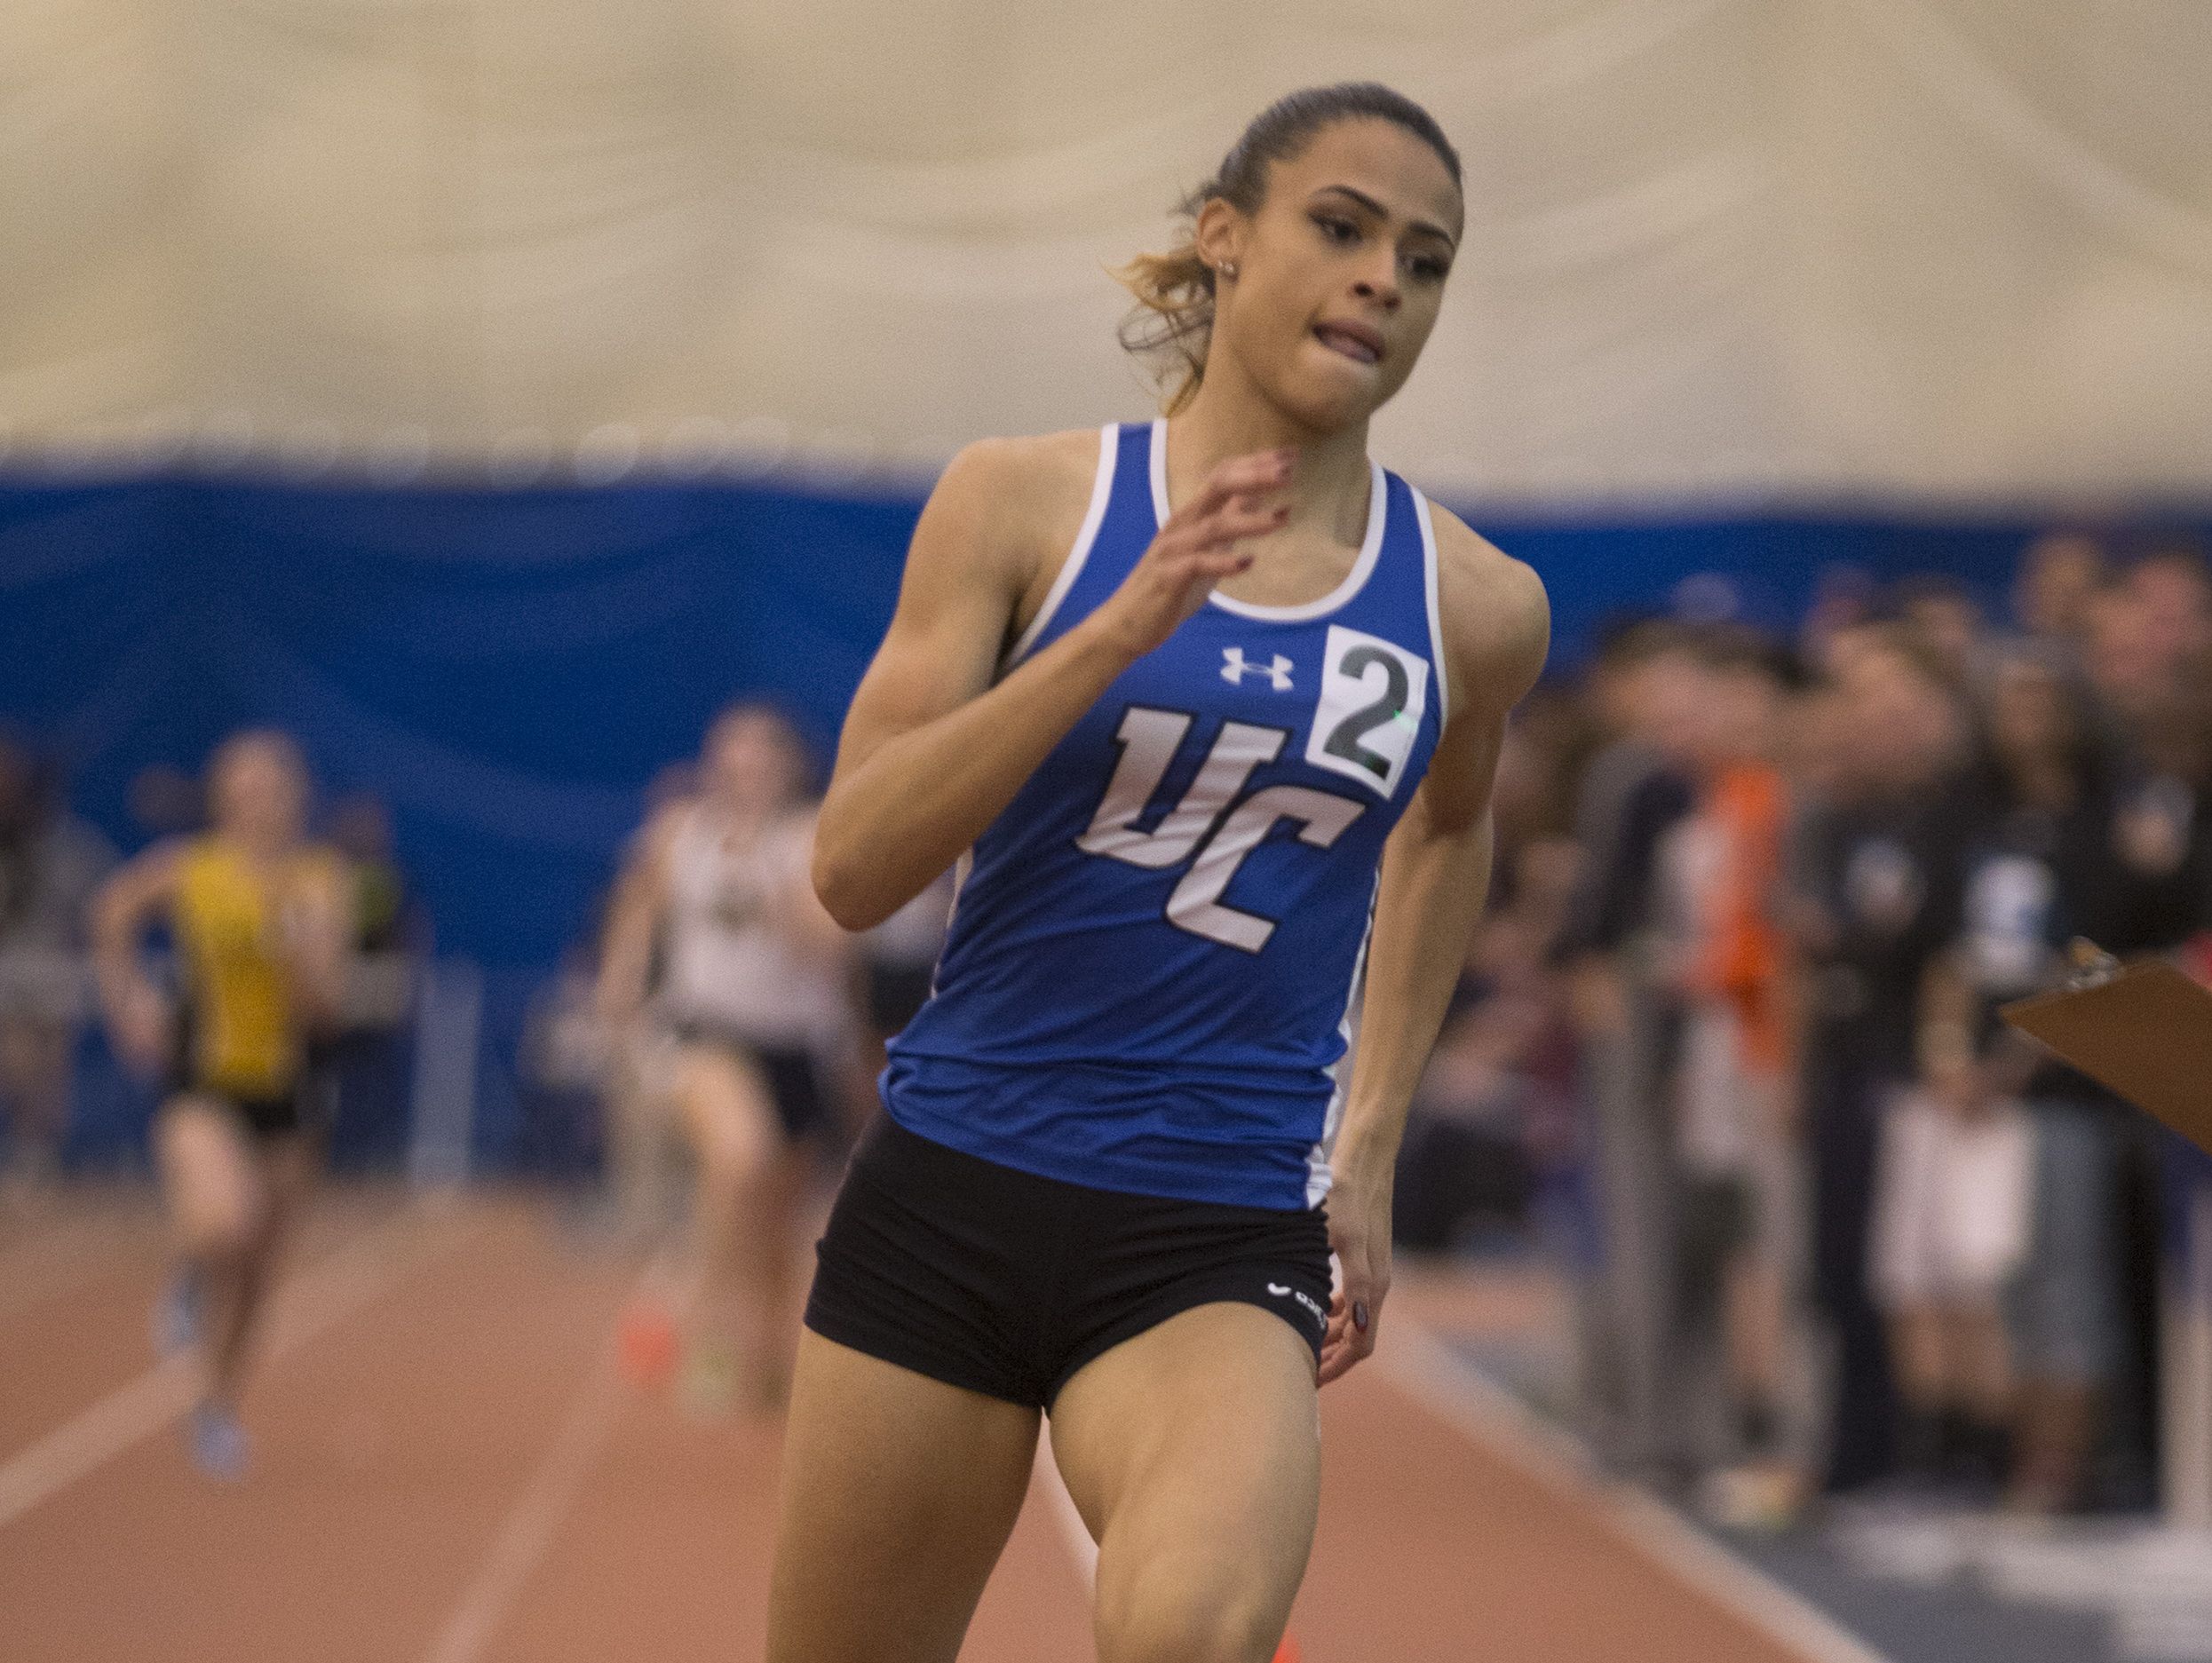 Union Catholic’s Sydney McLaughlin easily won the Girls Non-Public A 400 MeterDash. NJSIAA Non-Public A and B Group Track Meet at Bennett Complex in Toms River NJ on February 18, 2017.